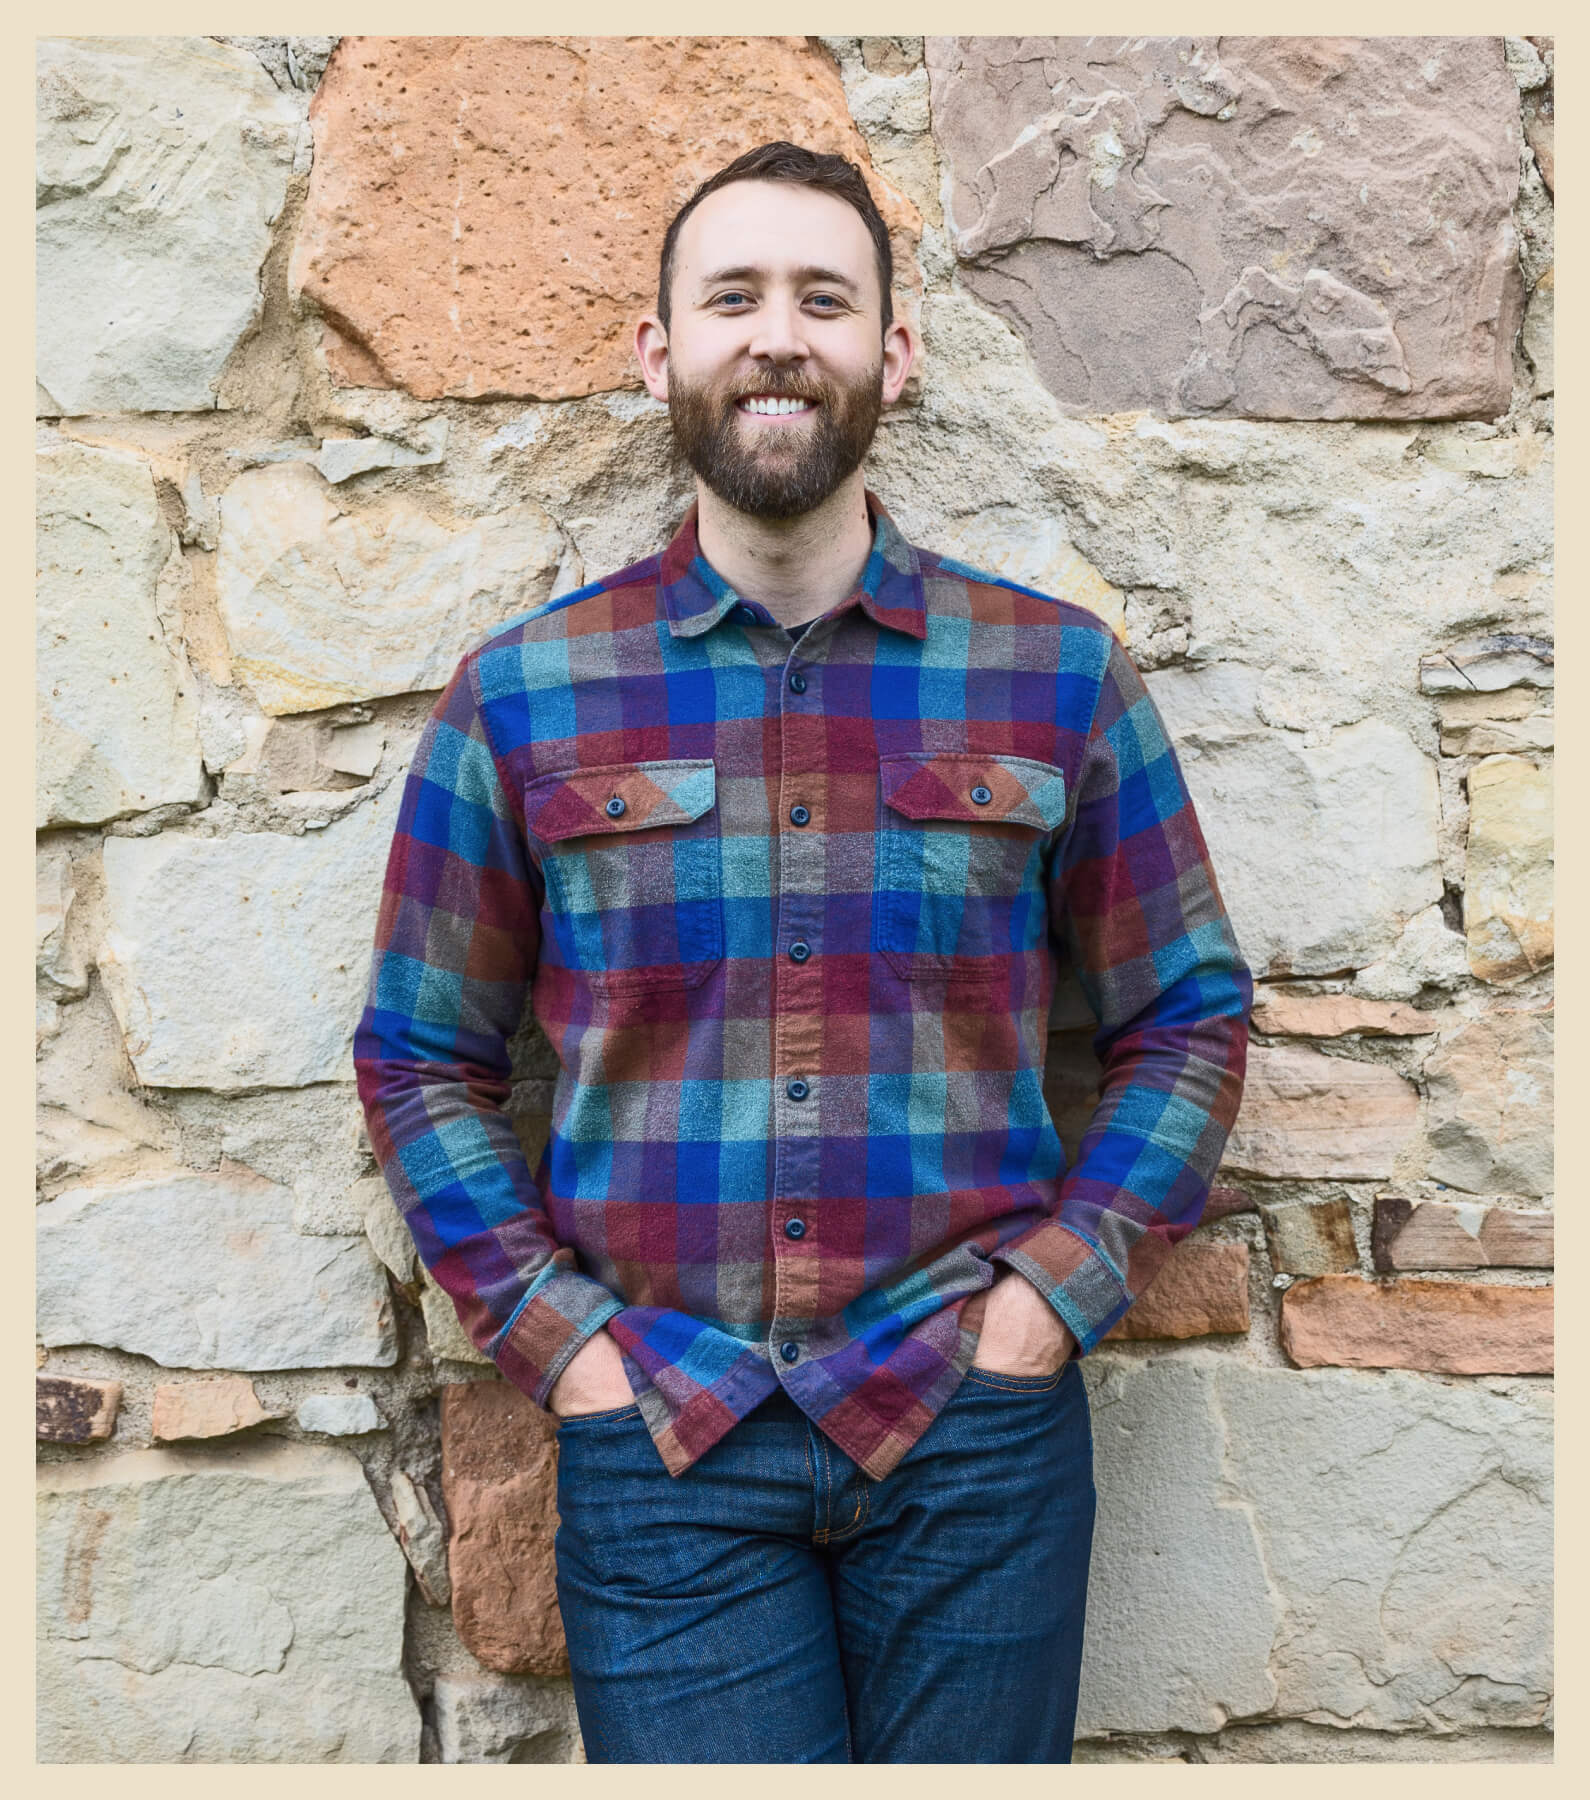 A man with a beard, wearing a plaid shirt and jeans, stands with his hands in his pockets against a rustic stone wall.